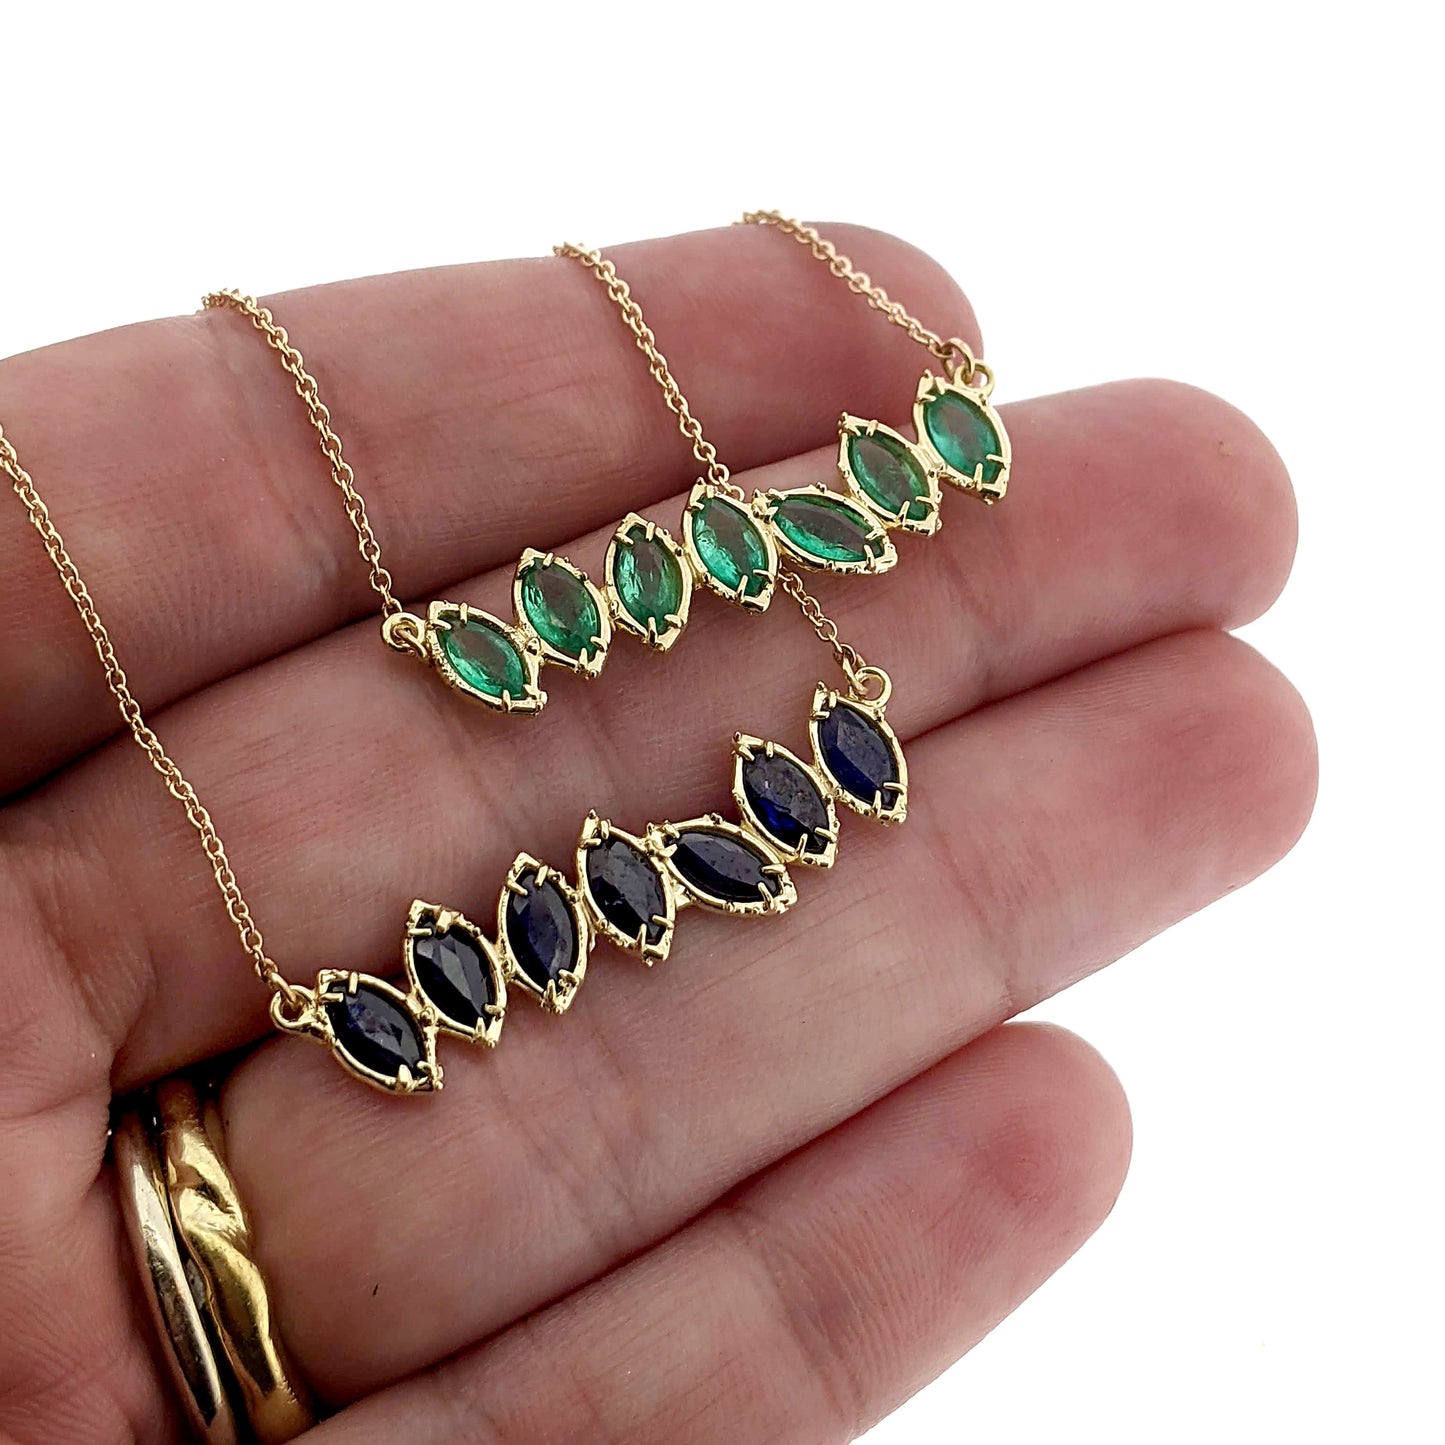 Full view of green and blue Cherin Necklaces hanging from woman's hand to help give an idea of their scale.